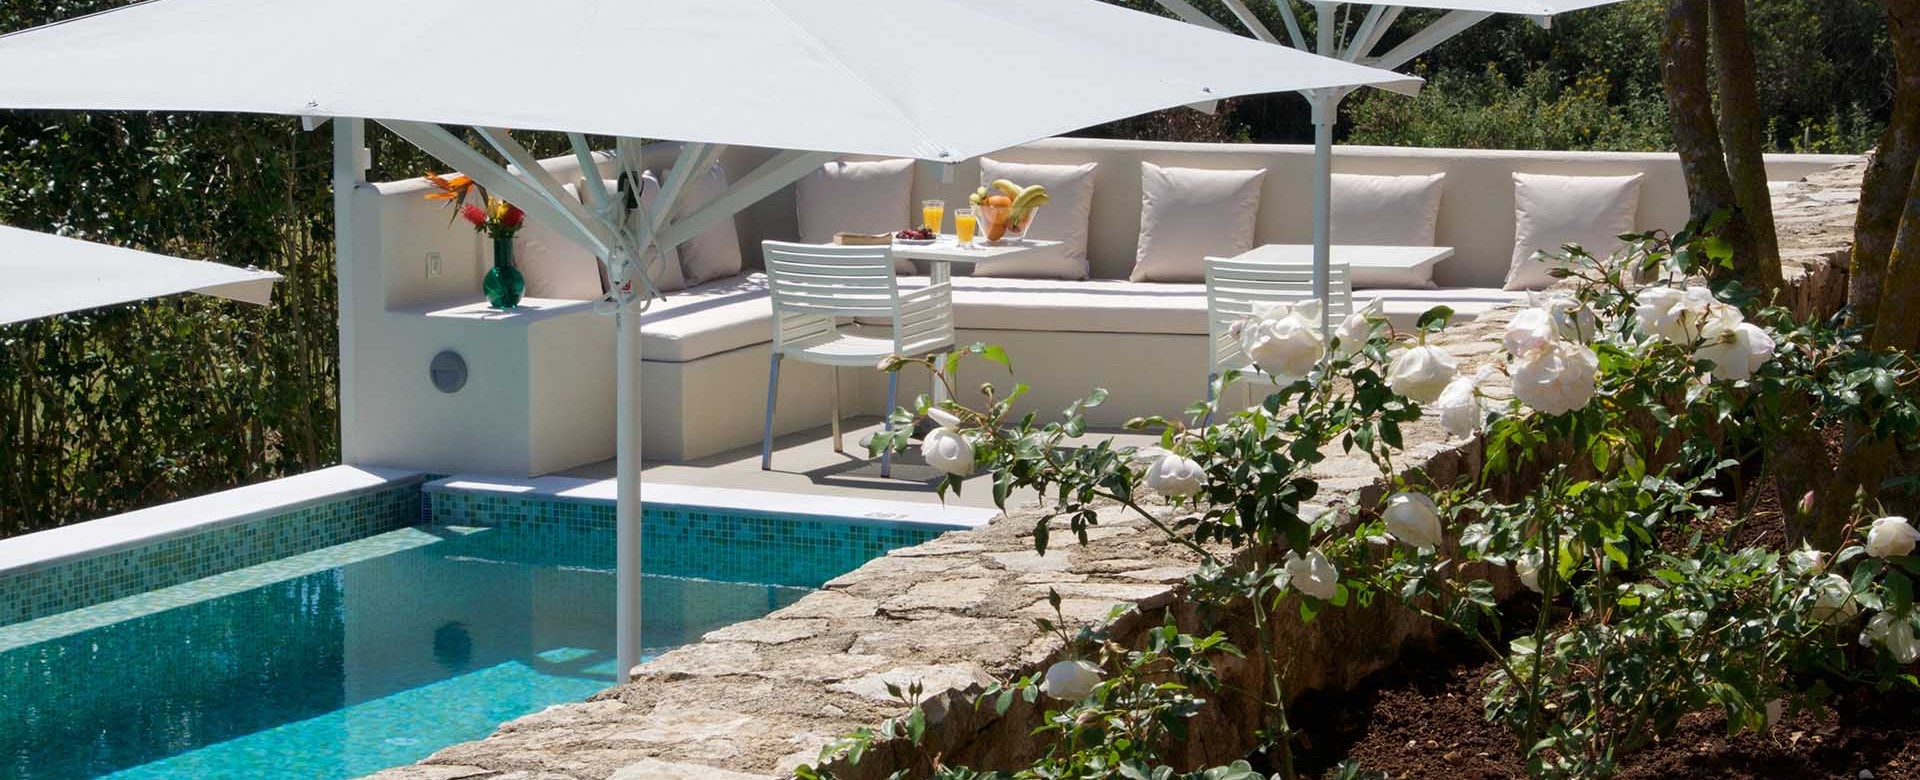 Gardens and outside seating at Magnolia Apartments, Fiscardo, Kefalonia, Greek Islands